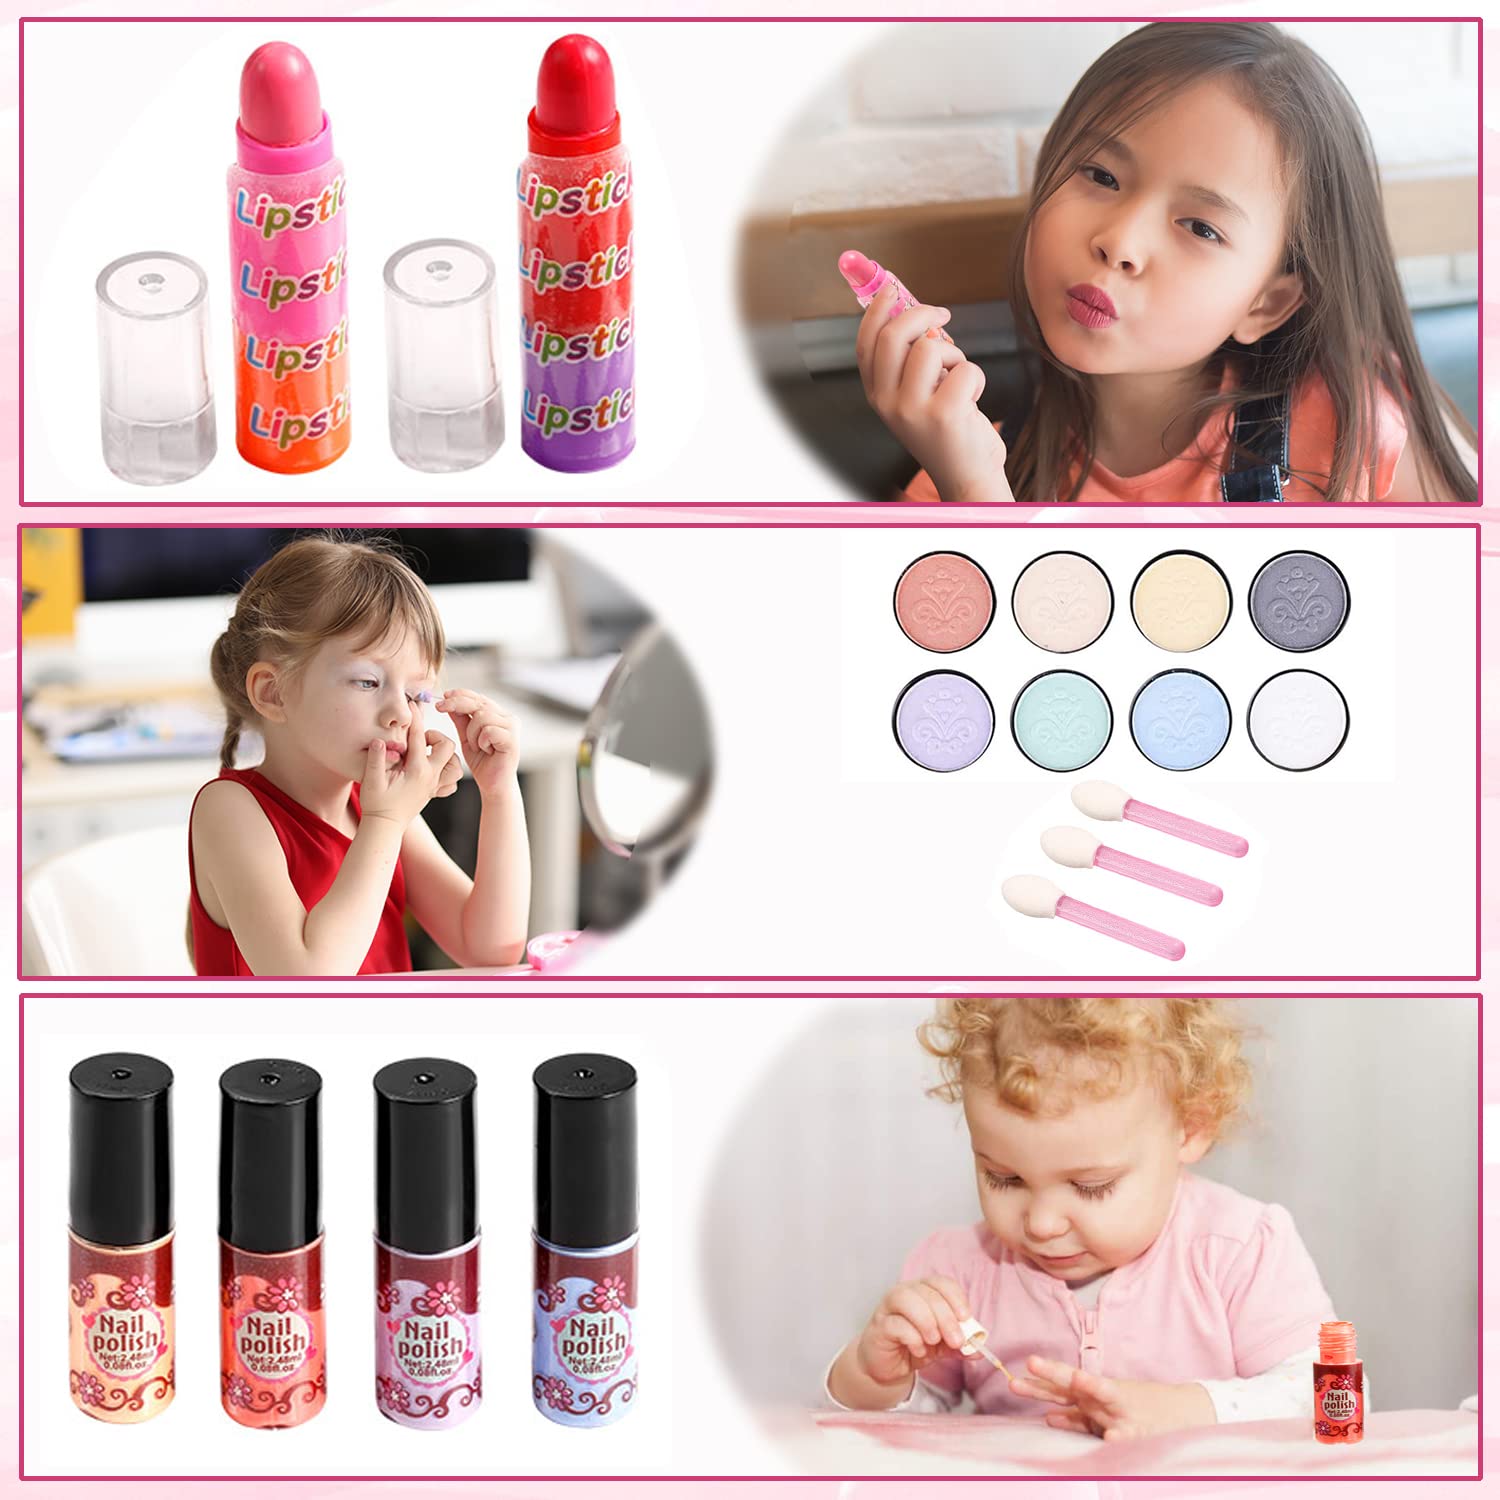 Vextronic Kids Makeup Kit for Girl, Washable Girls Makeup Kit, Non-Toxic Pretend Play Makeup for Toddlers Little Girls Age 3 4 5 6 7 8 9 10 11 12, Toddler Makeup Set Toy, Birthday Gifts Black Pink